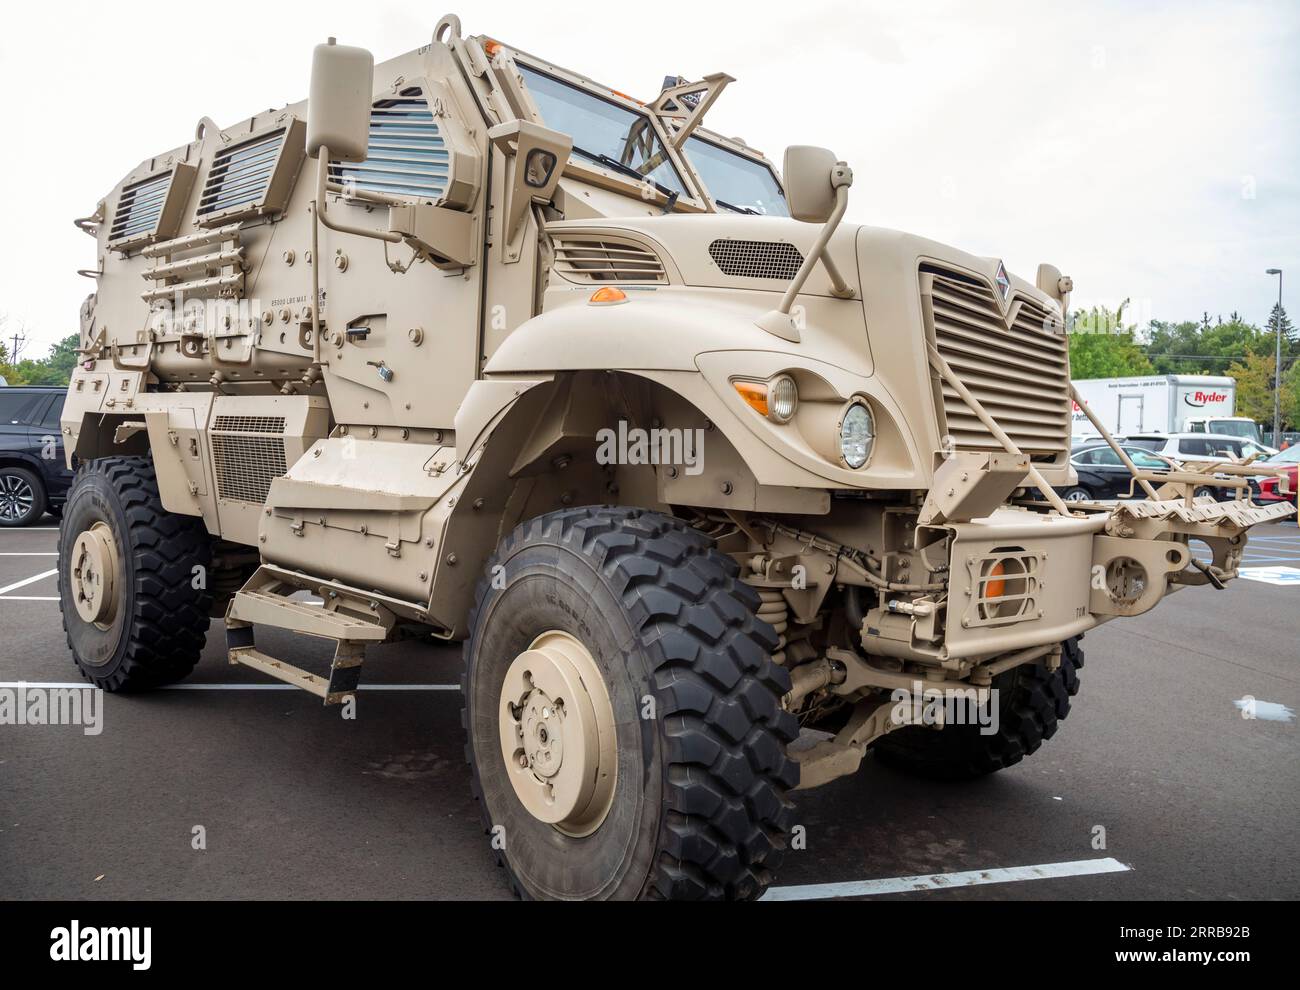 Novi, Michigan - gli appaltatori militari disiplay Weapons for the U.S. Army at the Ground Vehicle Systems Engineering & Technology Symposium (GVSETS). NA Foto Stock